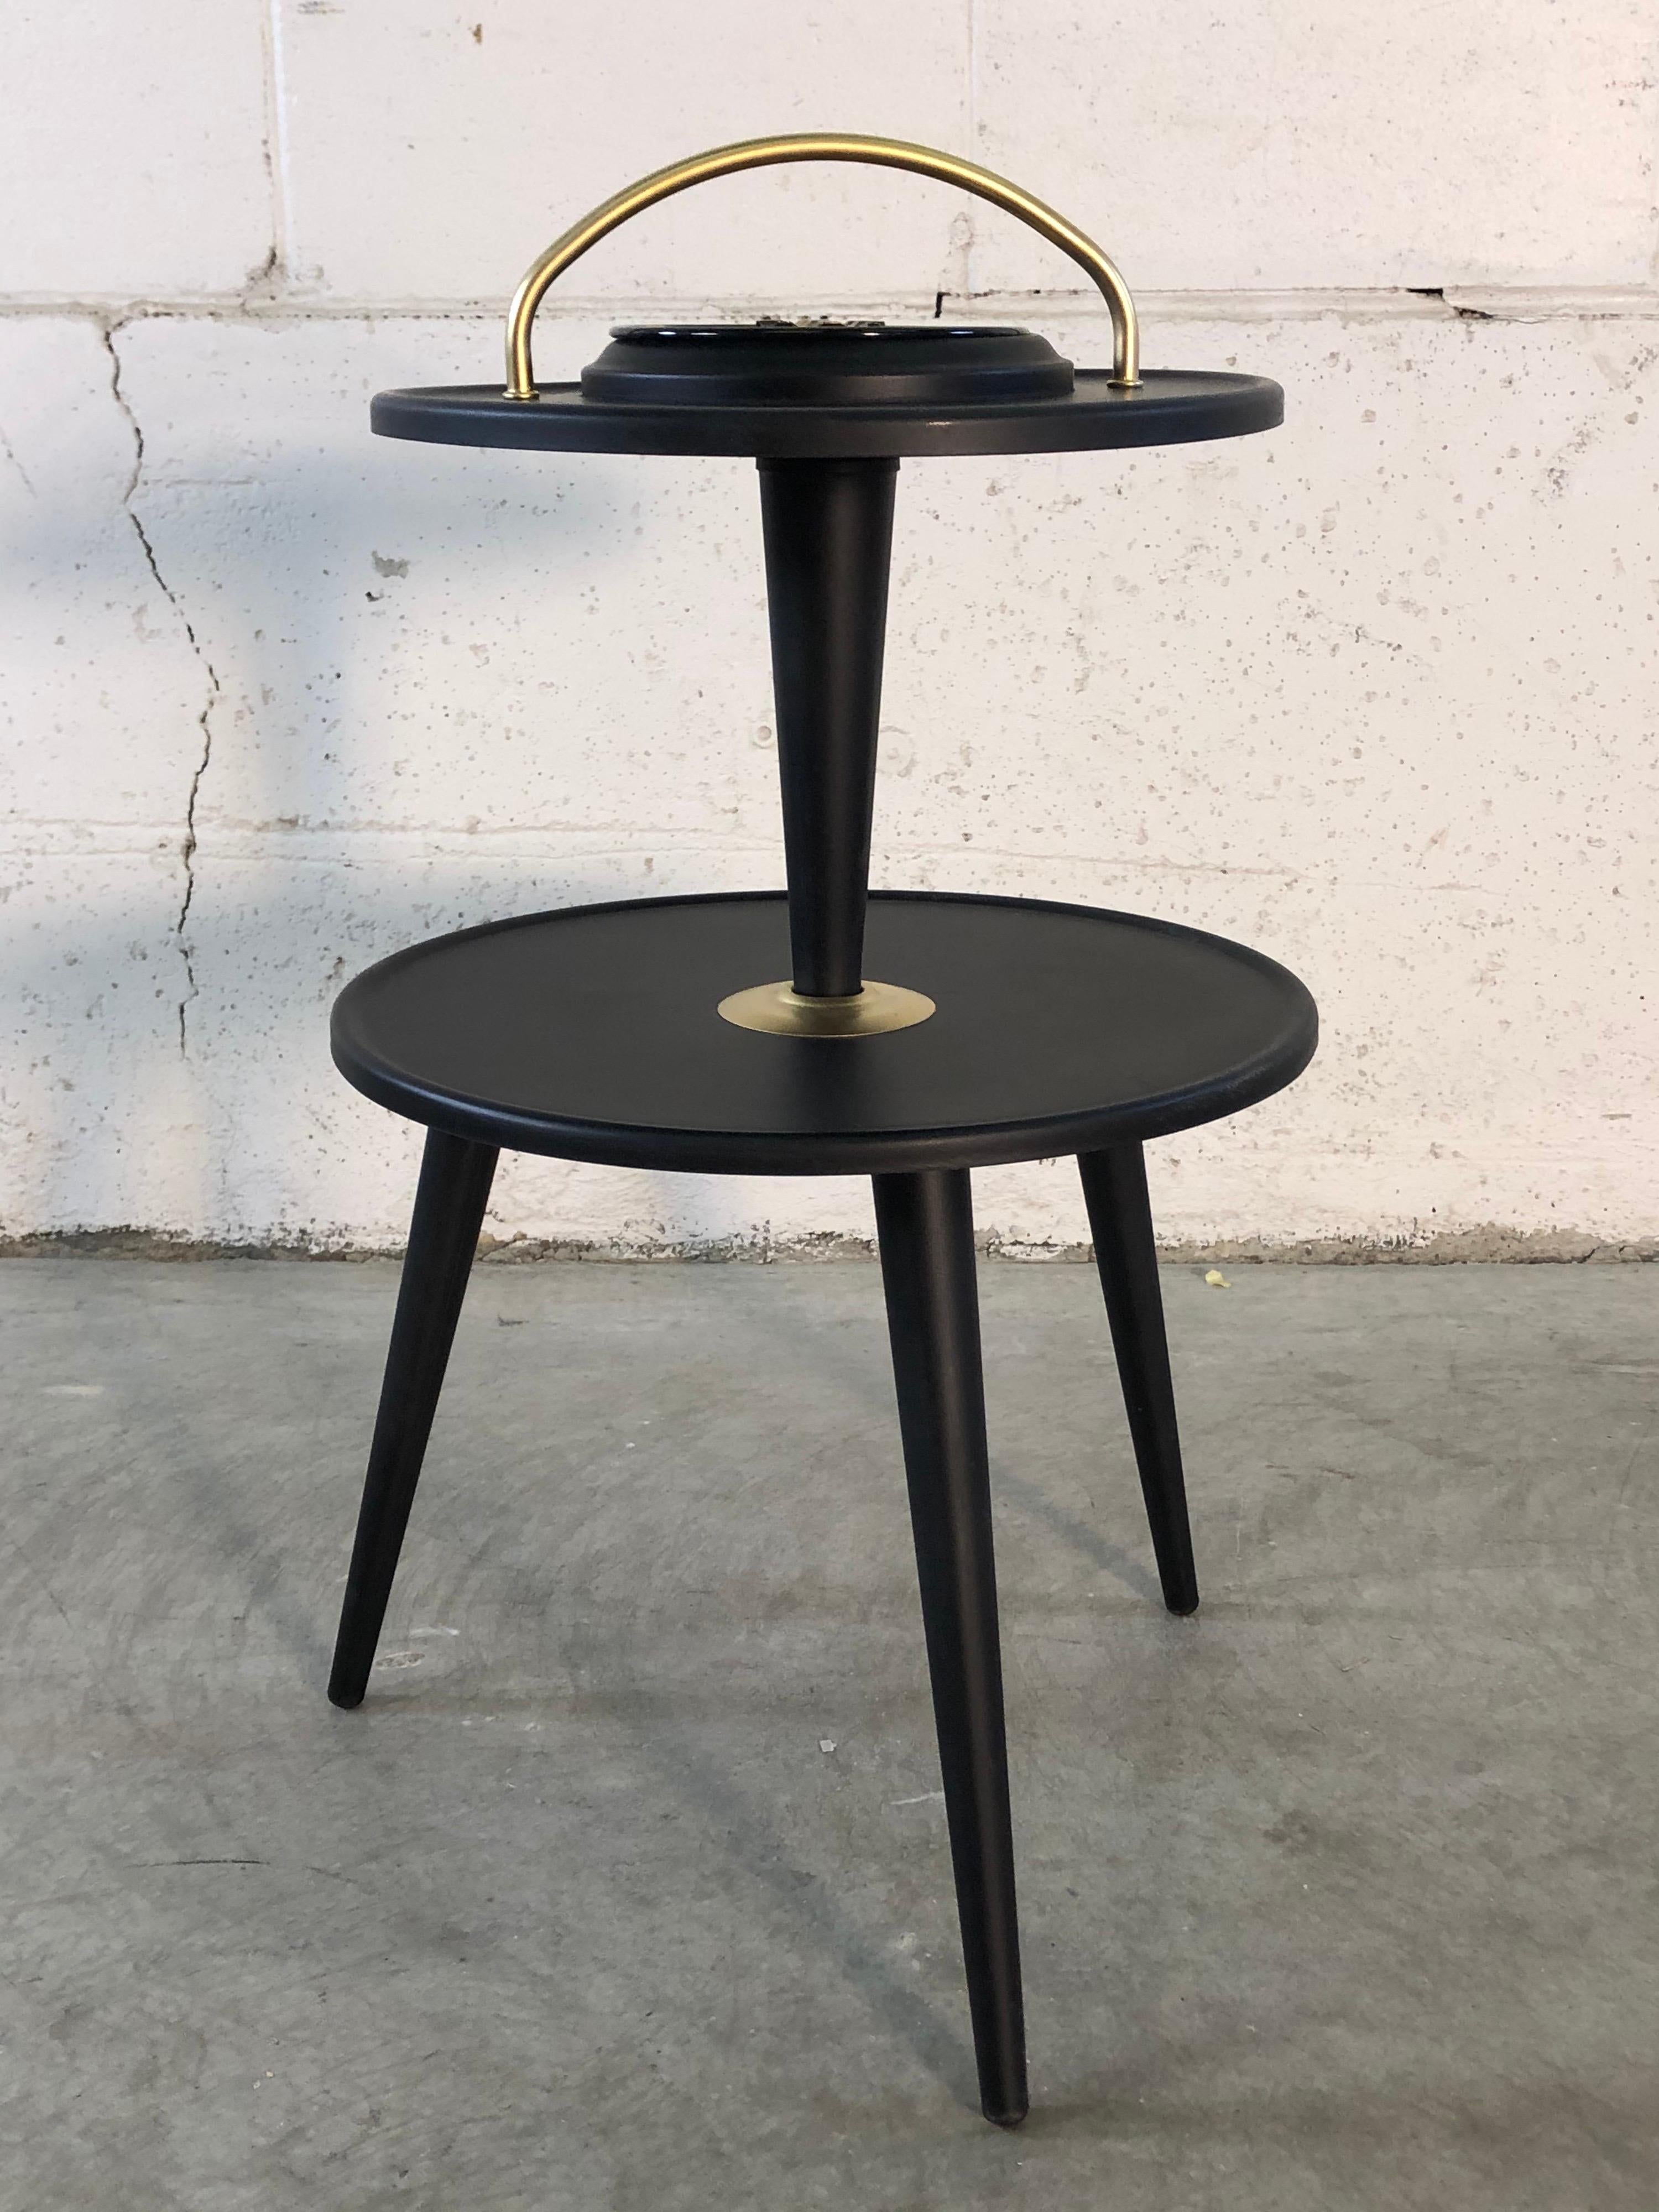 Vintage 1950s round handled black wood ashtray stand. The stand has been newly refinished and repainted. Comes with the enamel ashtray insert. No marks.